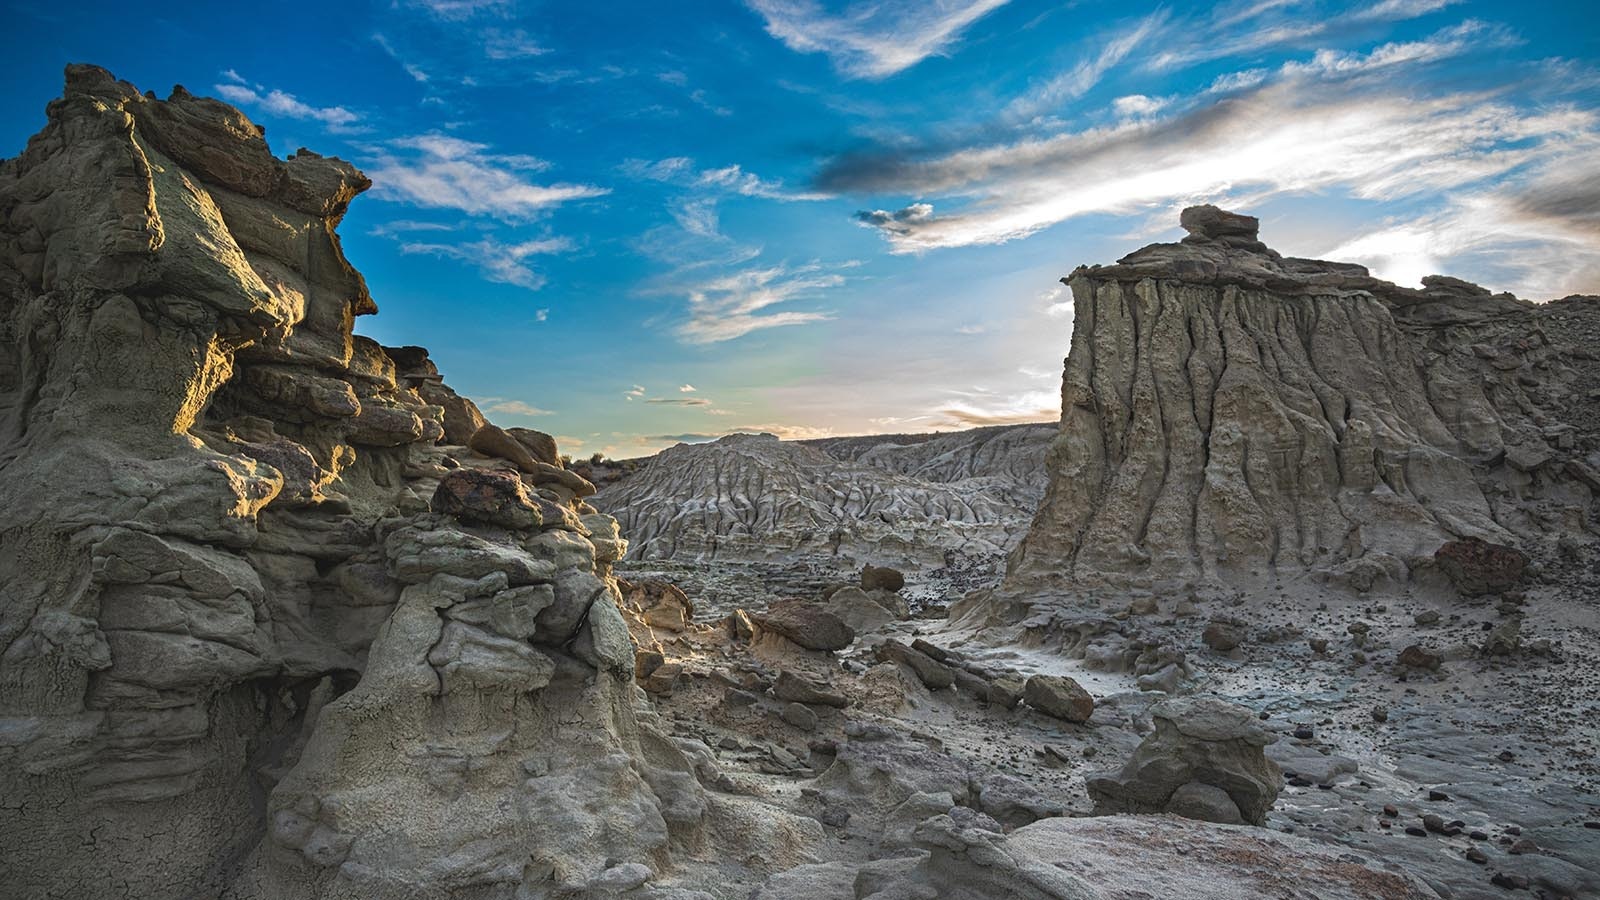 Adobe Town is one of the most mysterious and unusual outdoors spaces in Wyoming's Red Desert.